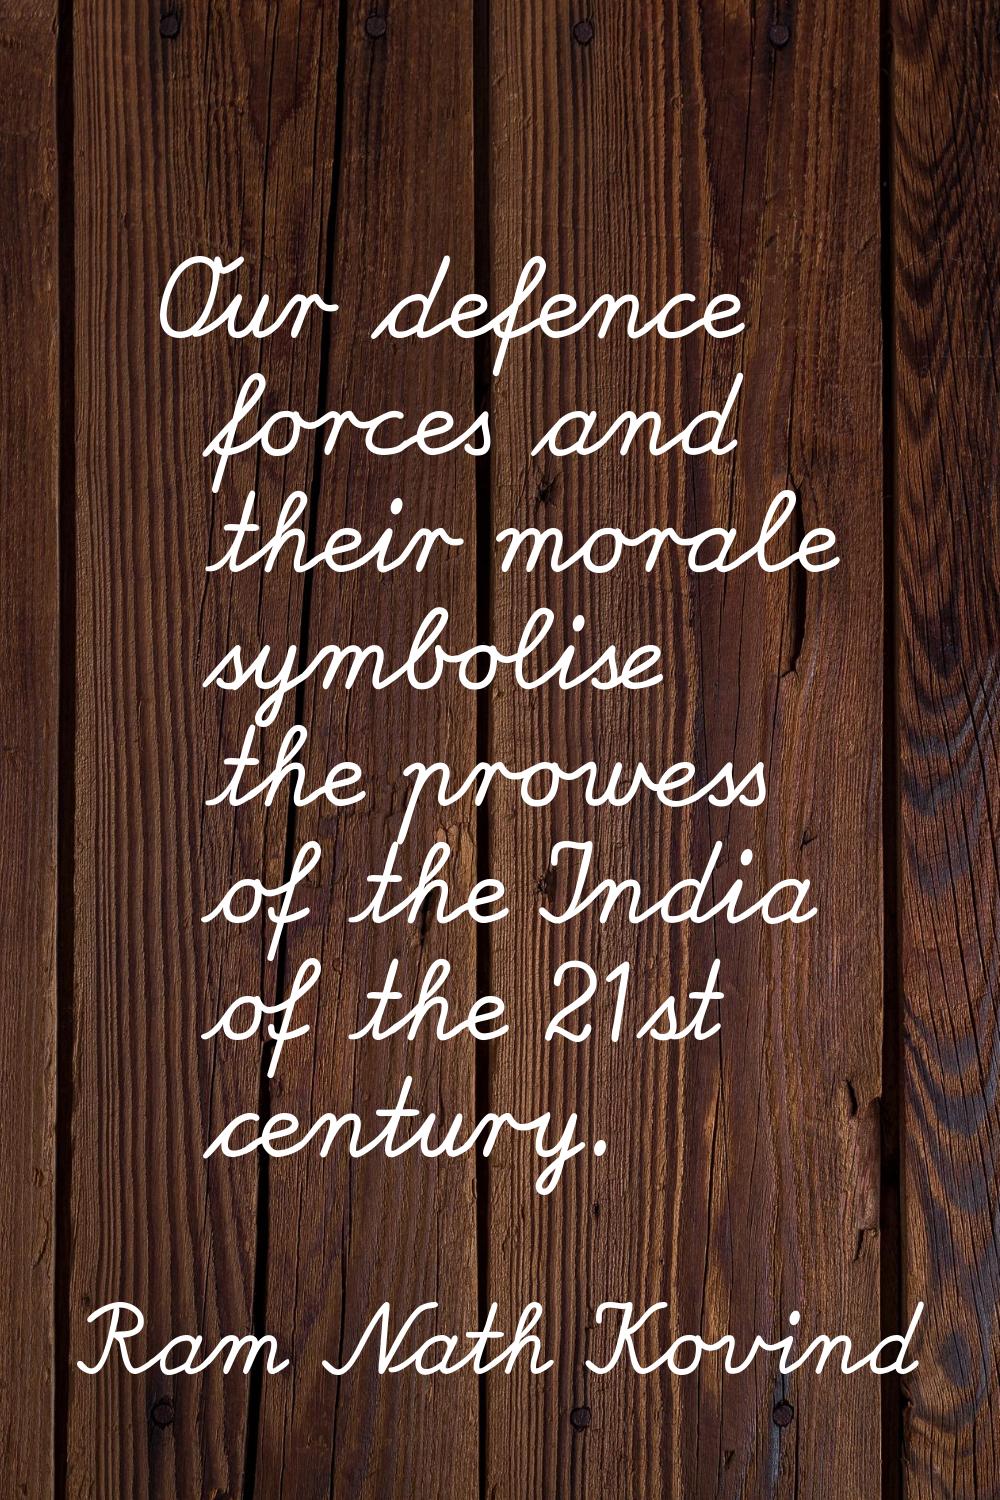 Our defence forces and their morale symbolise the prowess of the India of the 21st century.